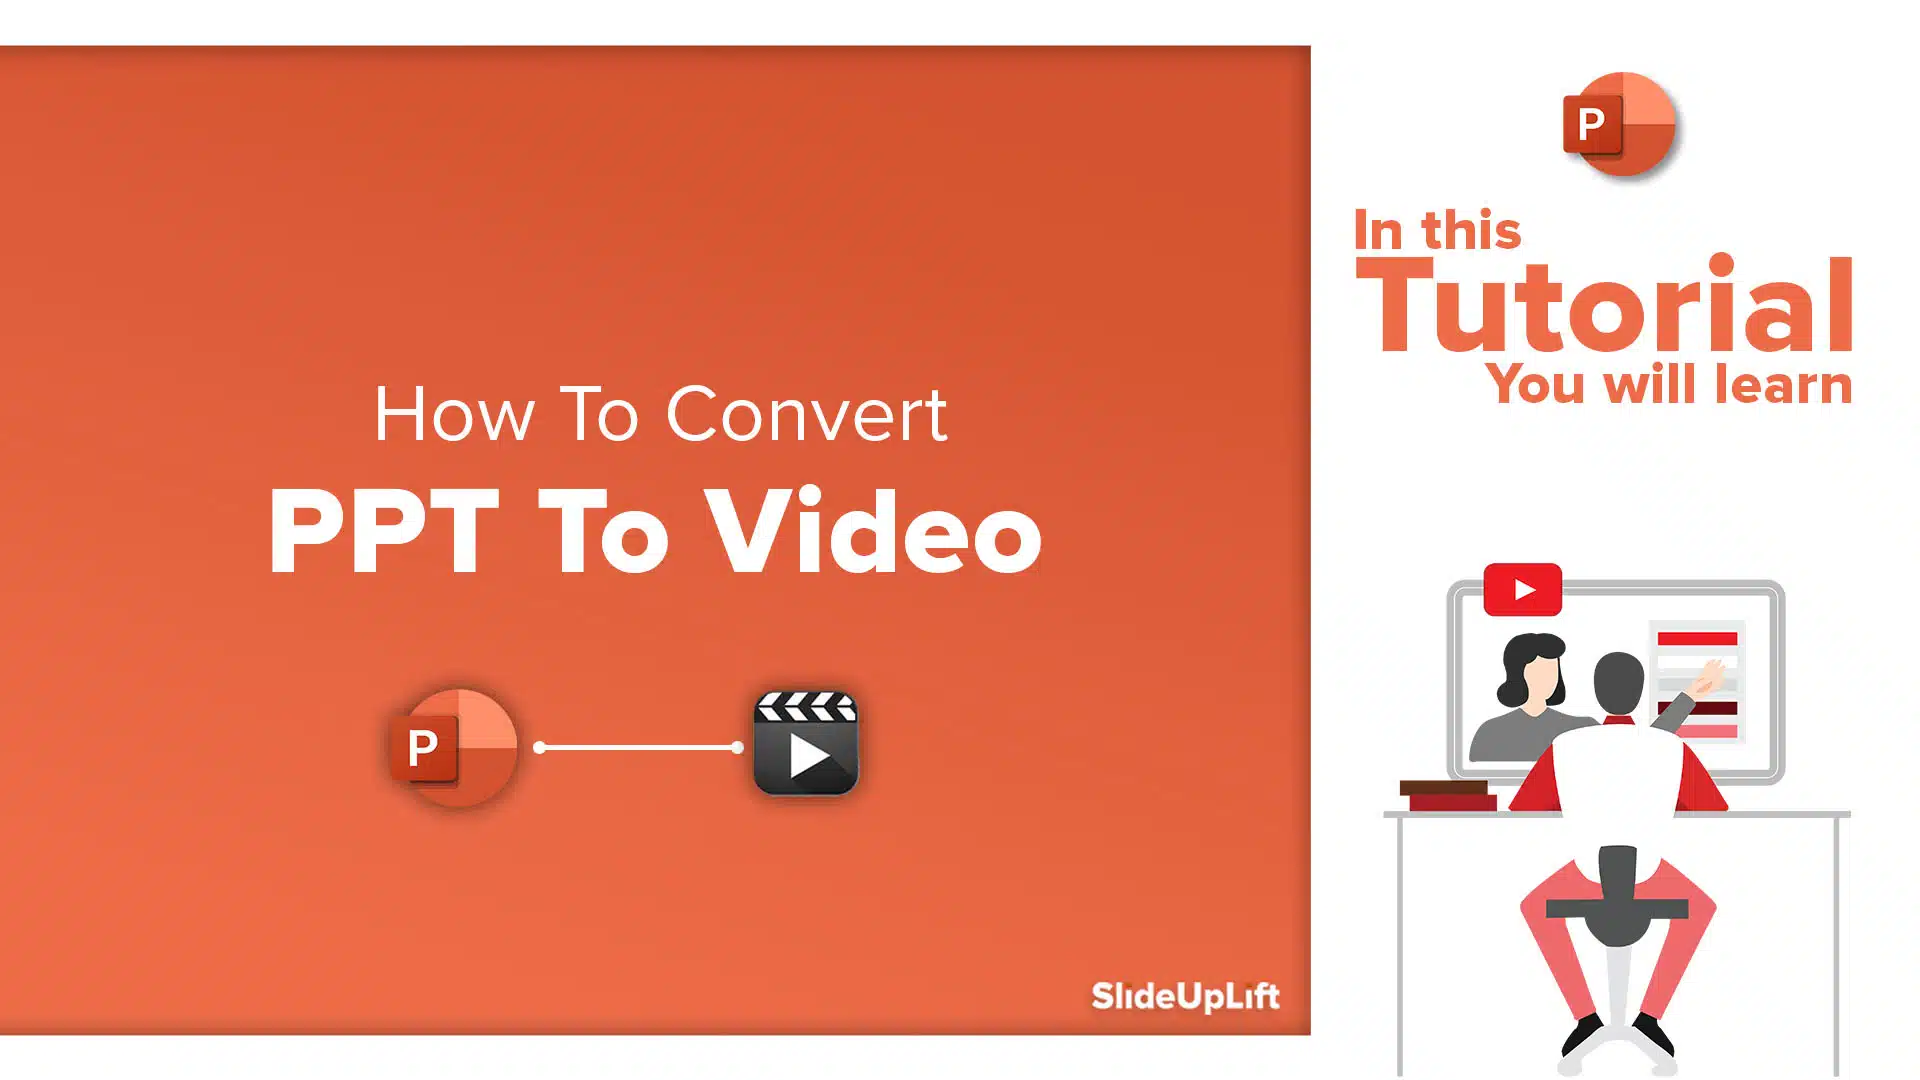 How To Convert PPT To Video | Presentation To Video